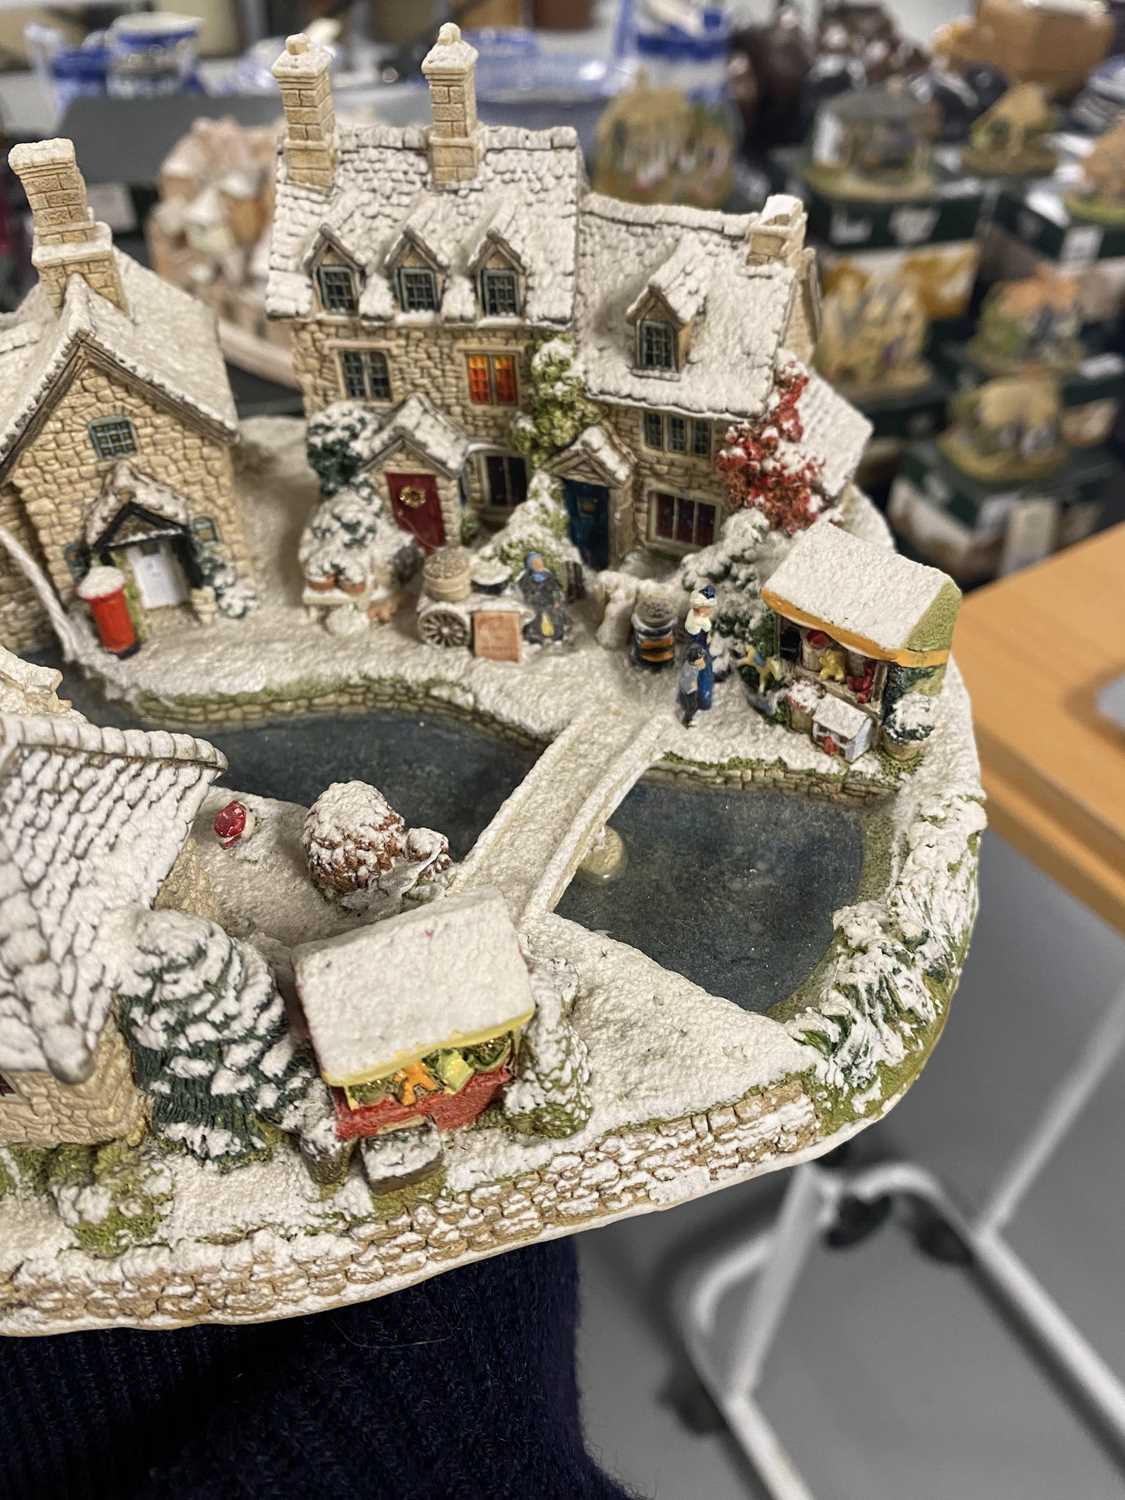 A Lilliput Lane limited edition model - Image 5 of 5